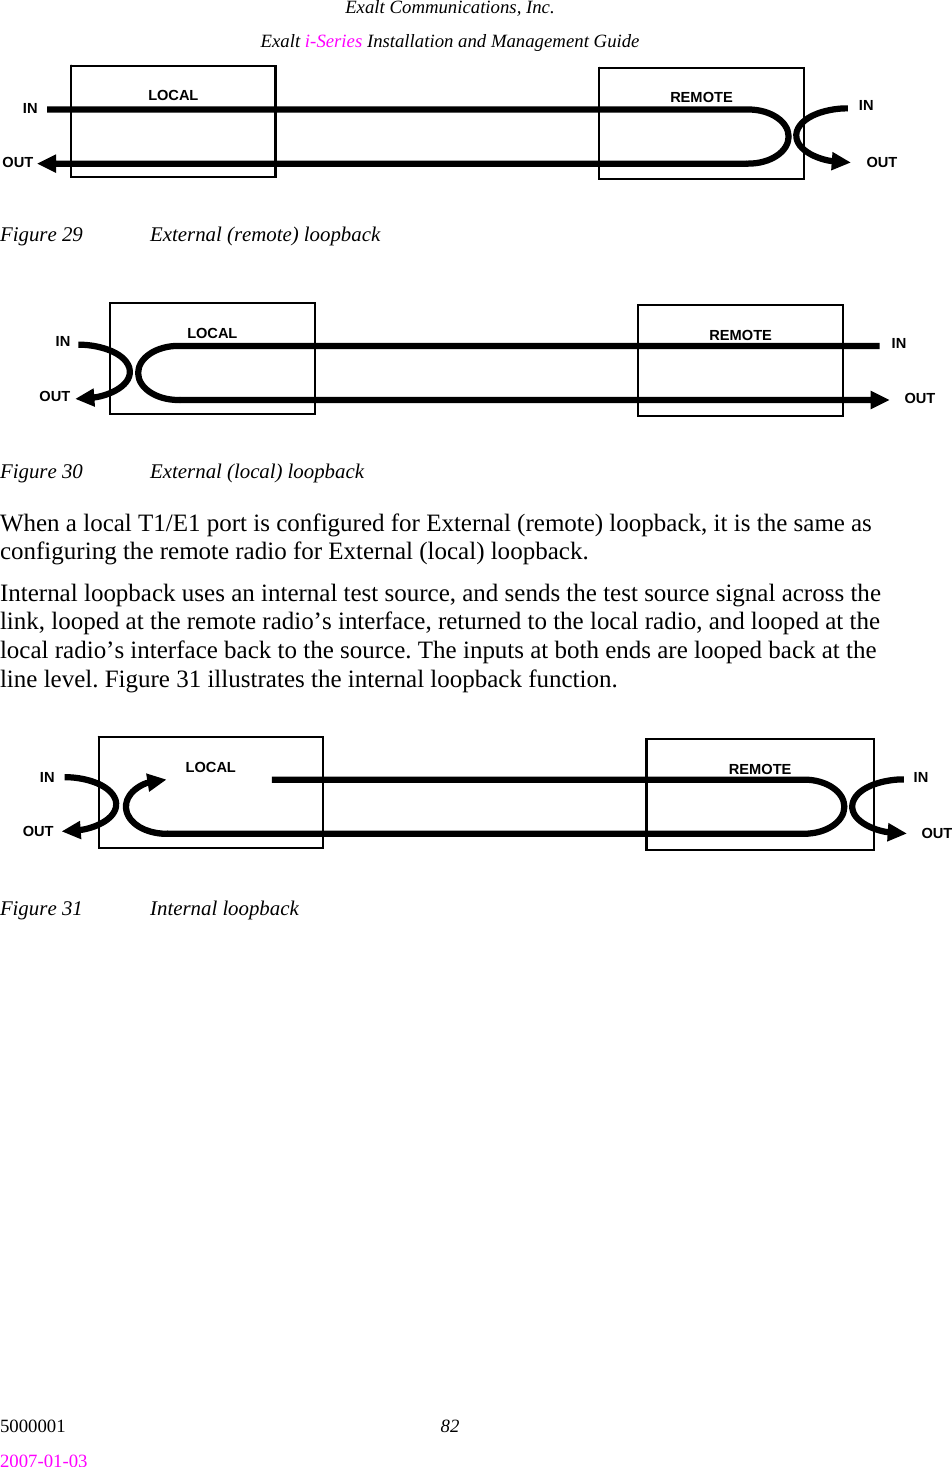 Exalt Communications, Inc. Exalt i-Series Installation and Management Guide 5000001  82 2007-01-03 Figure 29  External (remote) loopback Figure 30  External (local) loopback When a local T1/E1 port is configured for External (remote) loopback, it is the same as configuring the remote radio for External (local) loopback. Internal loopback uses an internal test source, and sends the test source signal across the link, looped at the remote radio’s interface, returned to the local radio, and looped at the local radio’s interface back to the source. The inputs at both ends are looped back at the line level. Figure 31 illustrates the internal loopback function. Figure 31  Internal loopback LOCAL  REMOTE IN OUT  OUT IN LOCAL  REMOTE IN OUT  OUT IN LOCAL  REMOTE IN OUT  OUT IN 